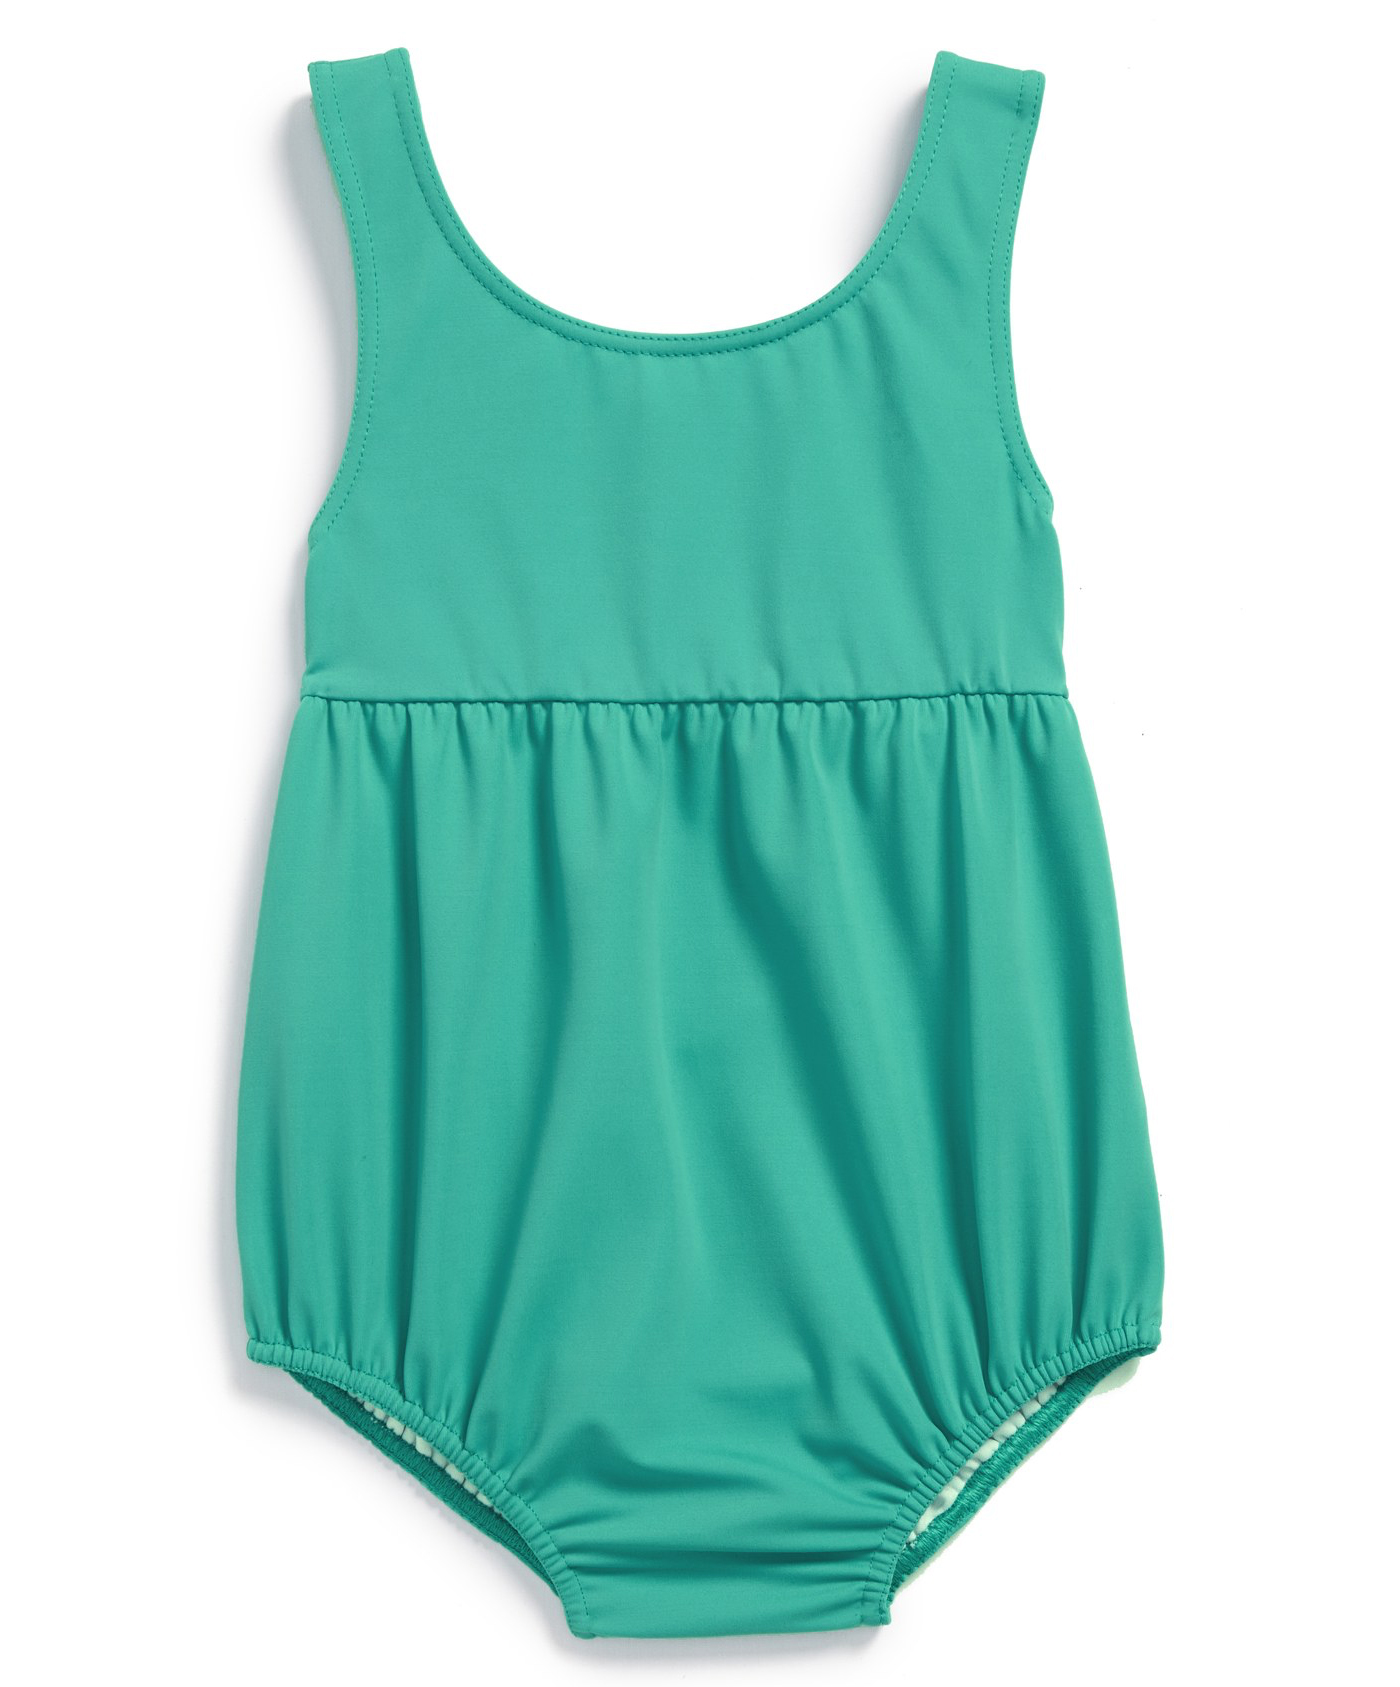 Girls One-Piece Swimsuit from Nordstrom